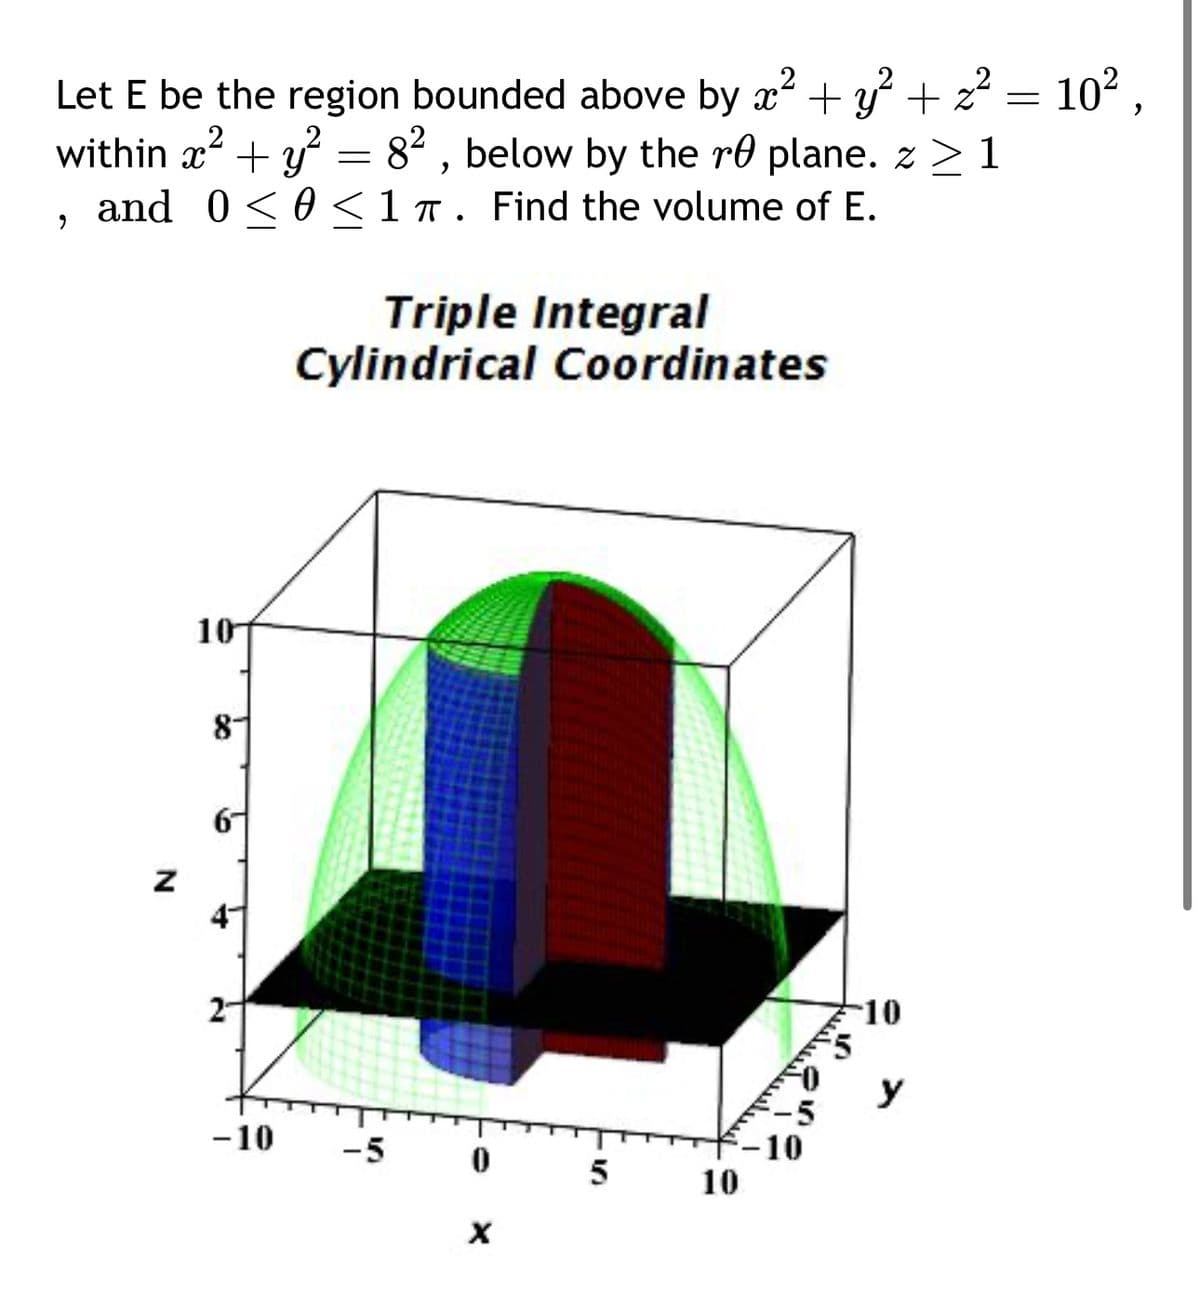 2
Let E be the region bounded above by x² + y² + z² = 10²,
within x² + y² = 8², below by the re plane. z > 1
,
2
and 0<< 1 π. Find the volume of E.
Triple Integral
Cylindrical Coordinates
10
N
8-
6
2-
-10
5
y
-10
-5
10
0
5
10
x